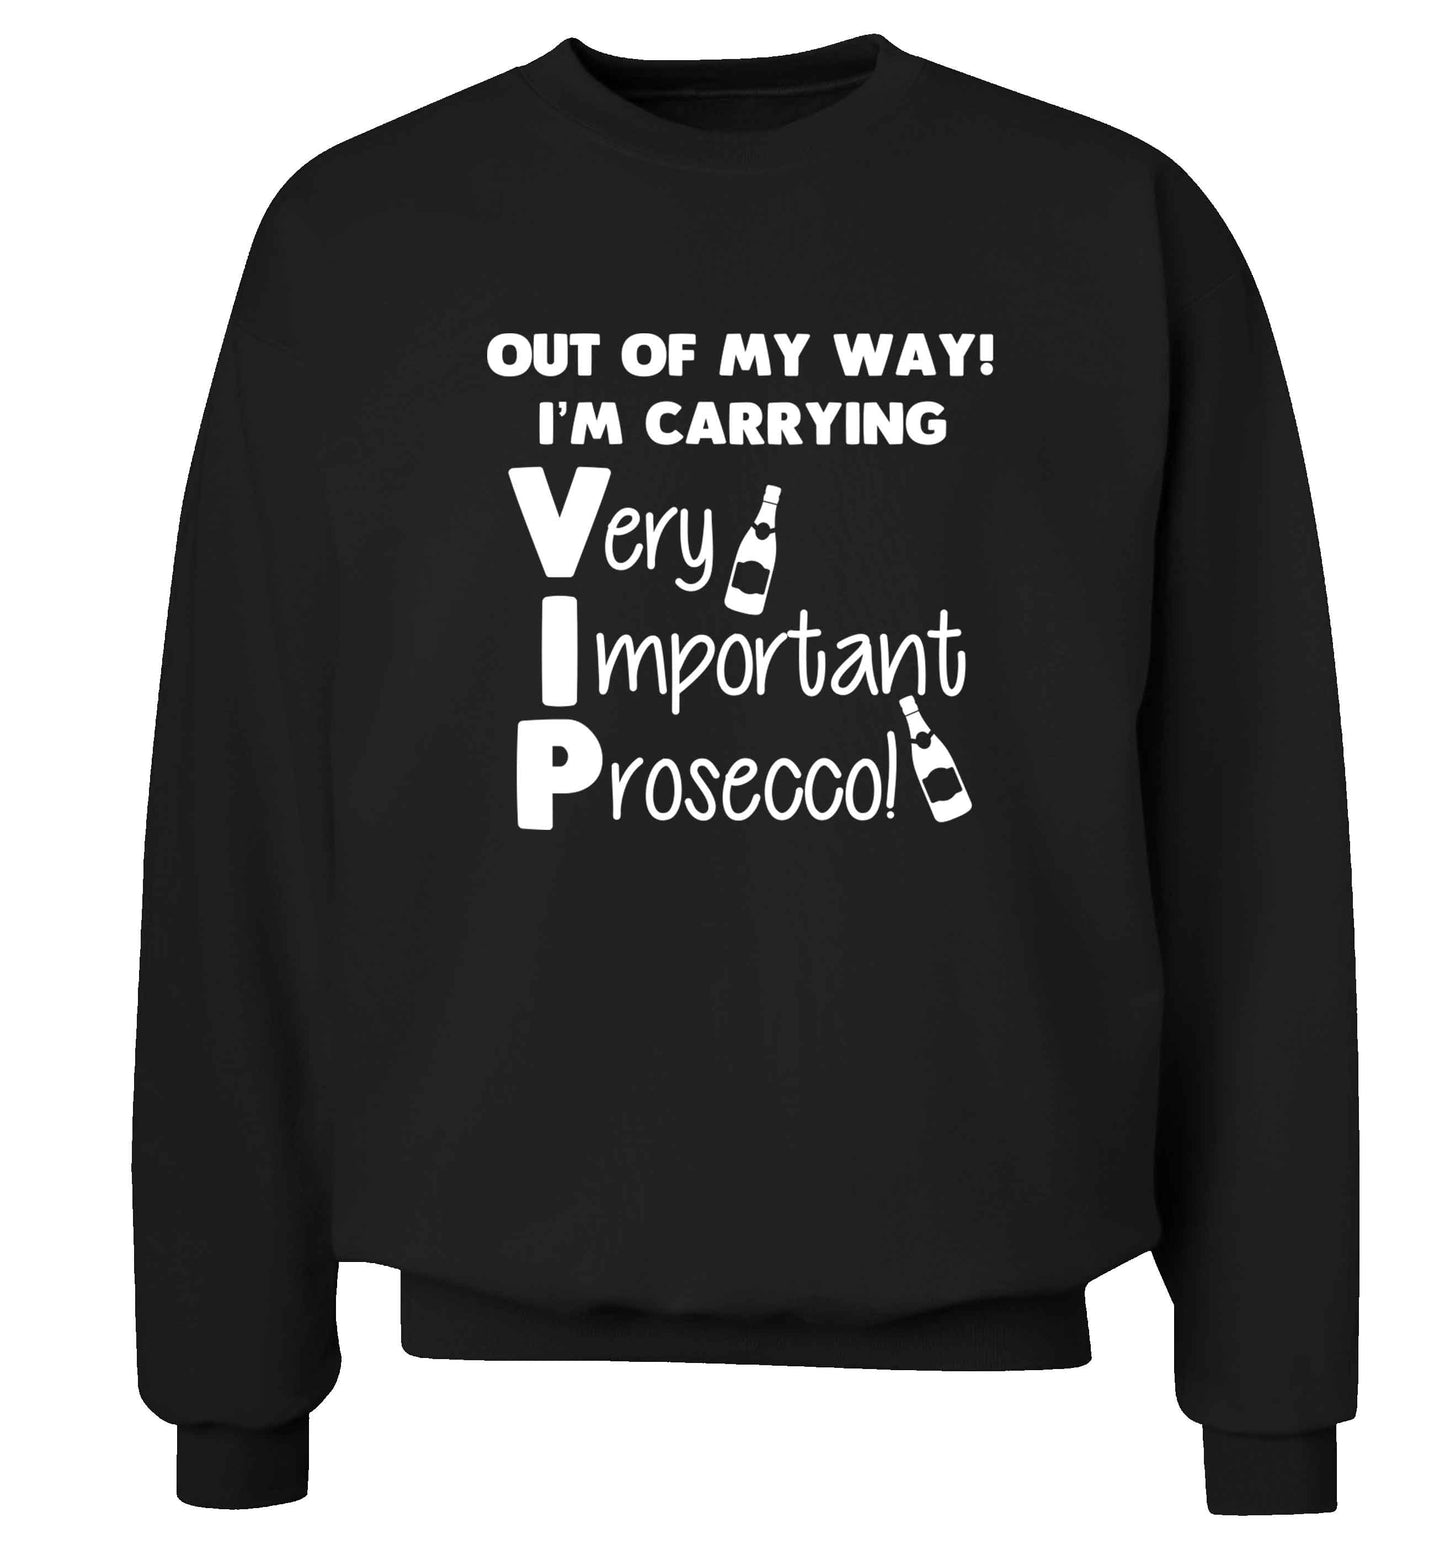 Out of my way I'm carrying very important prosecco! adult's unisex black sweater 2XL